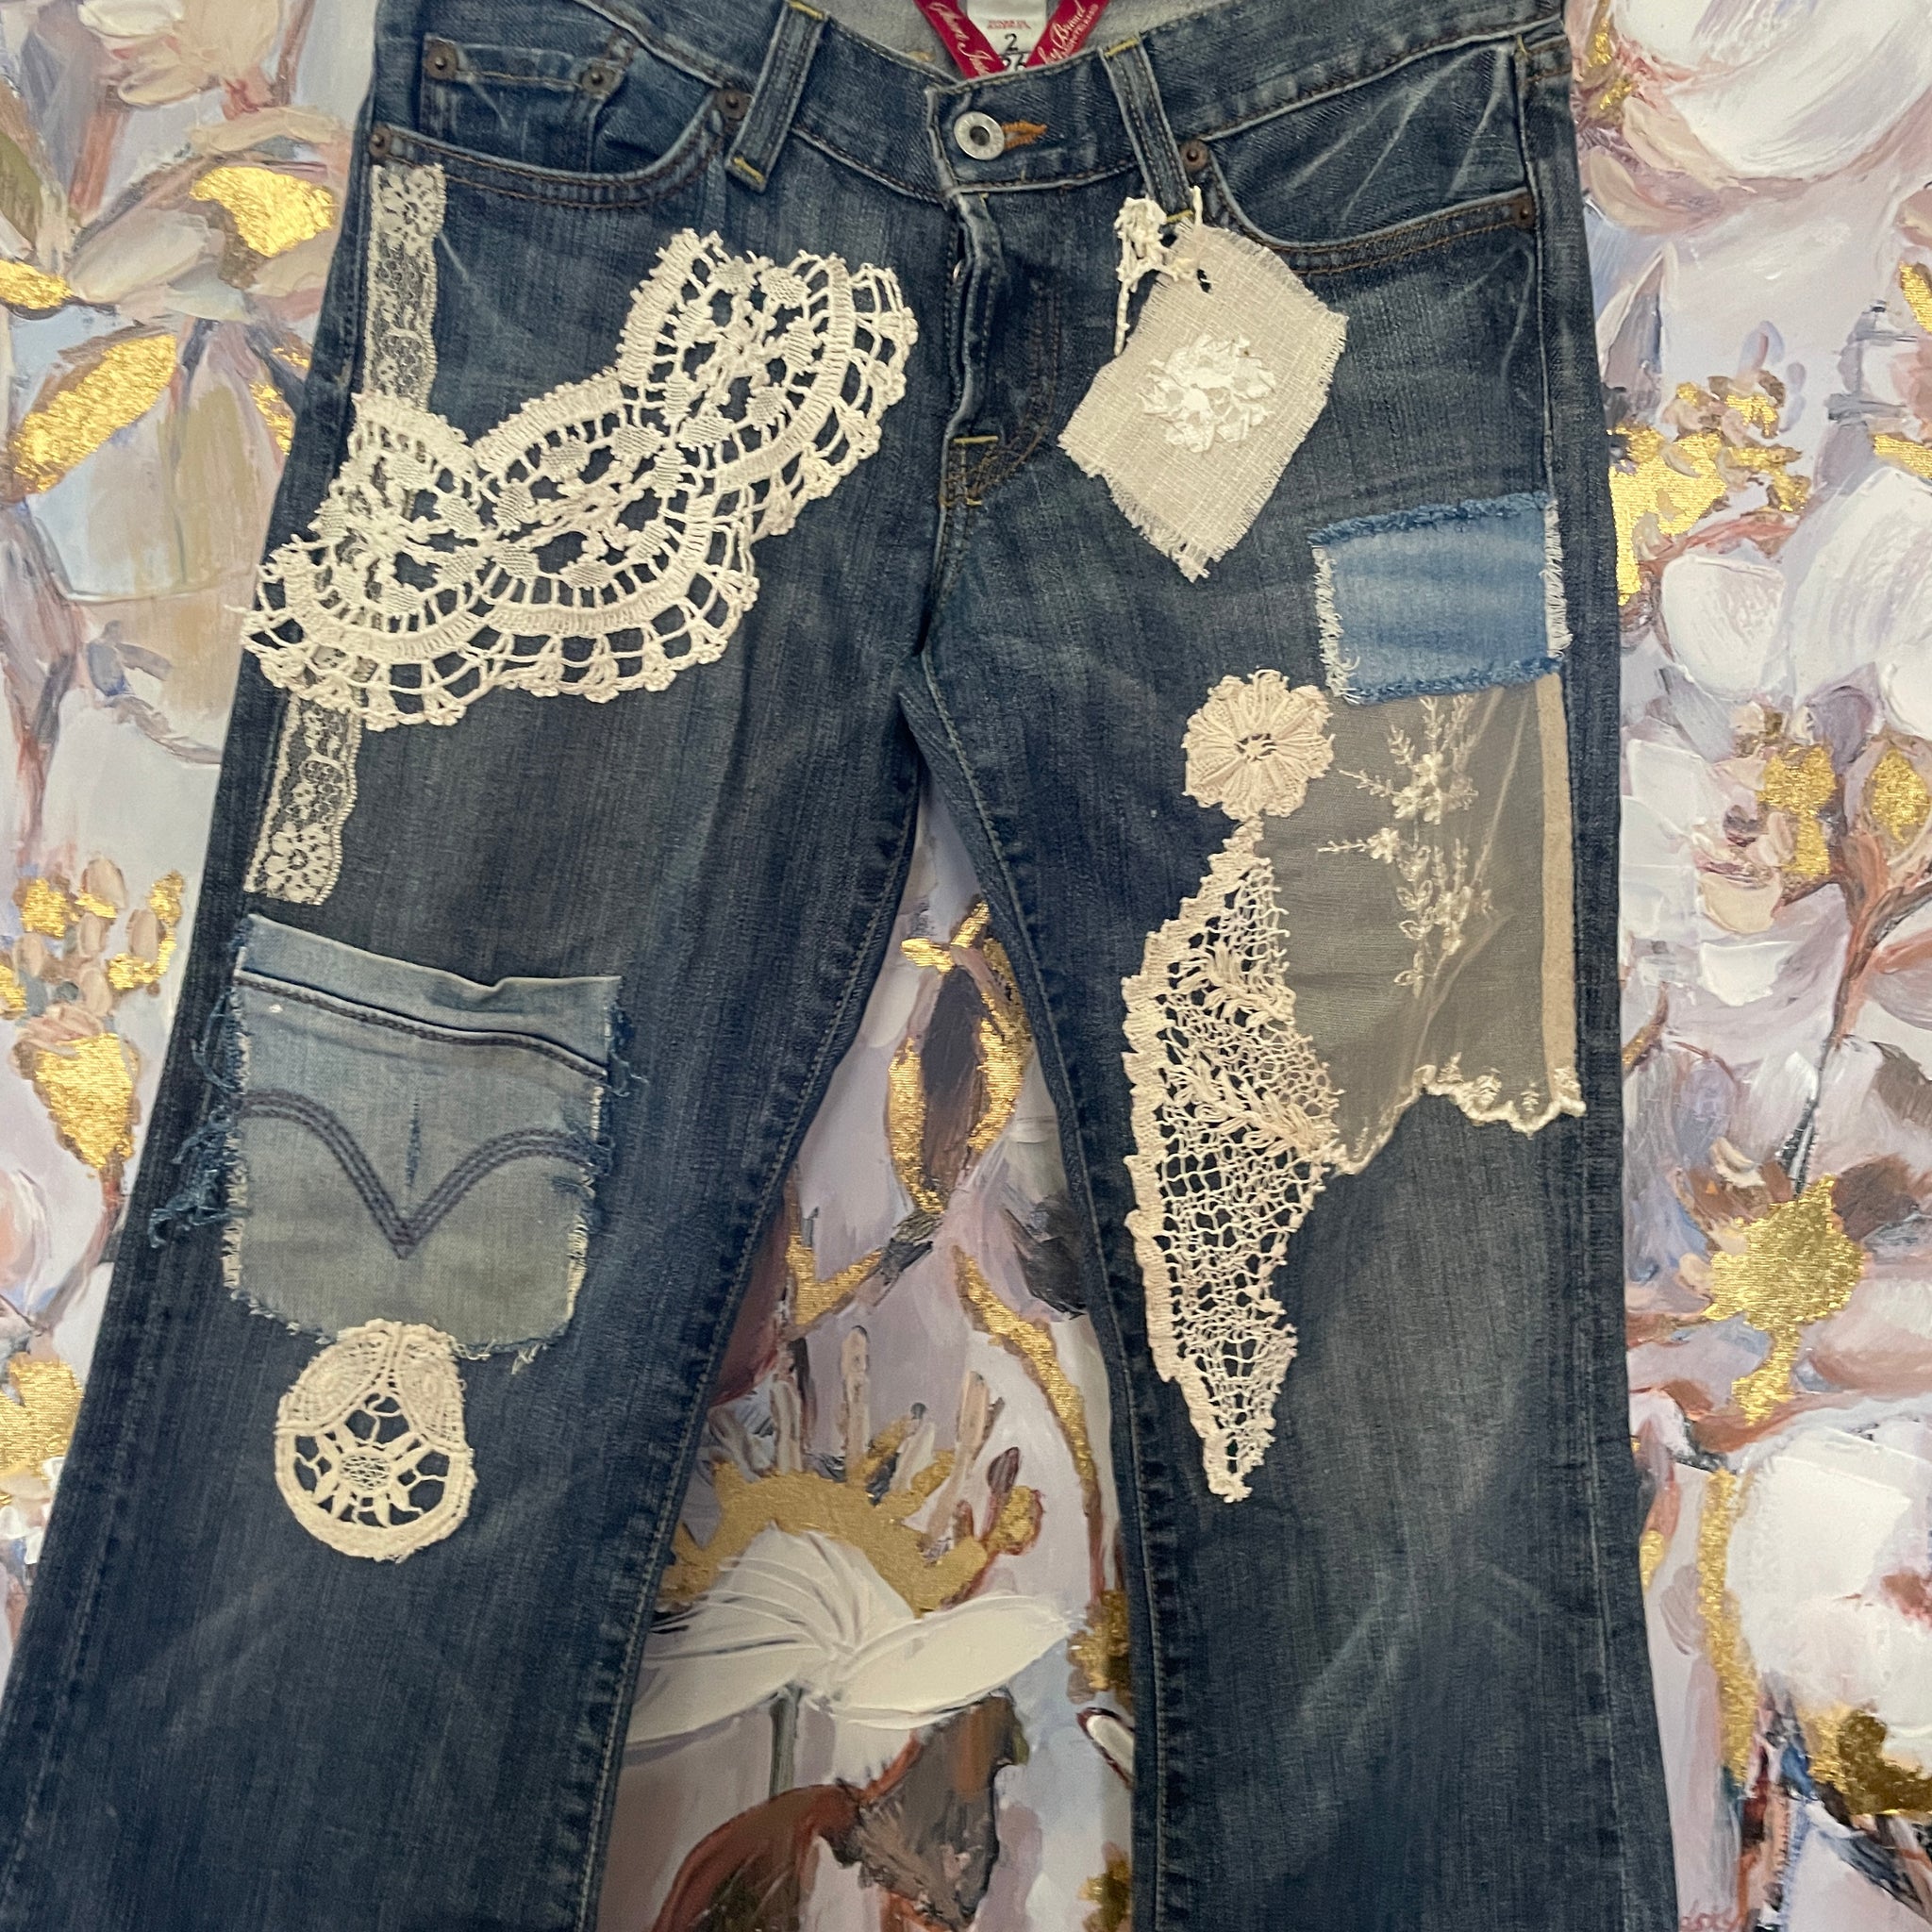 One of a kind repurposed jeans